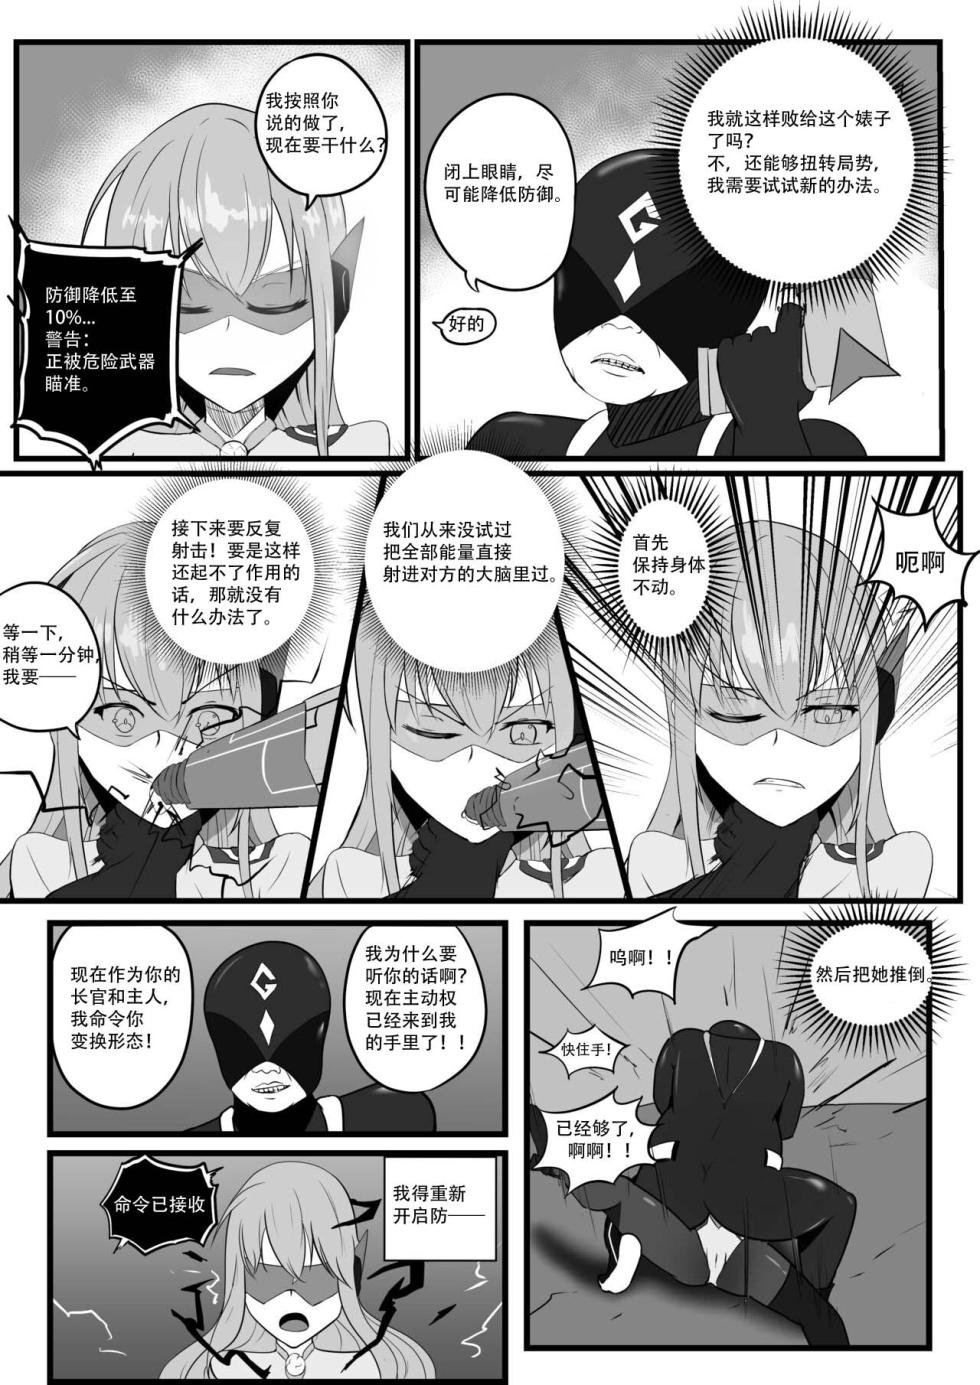 [Aynes] The Degradation of Angels [心海汉化组] - Page 5